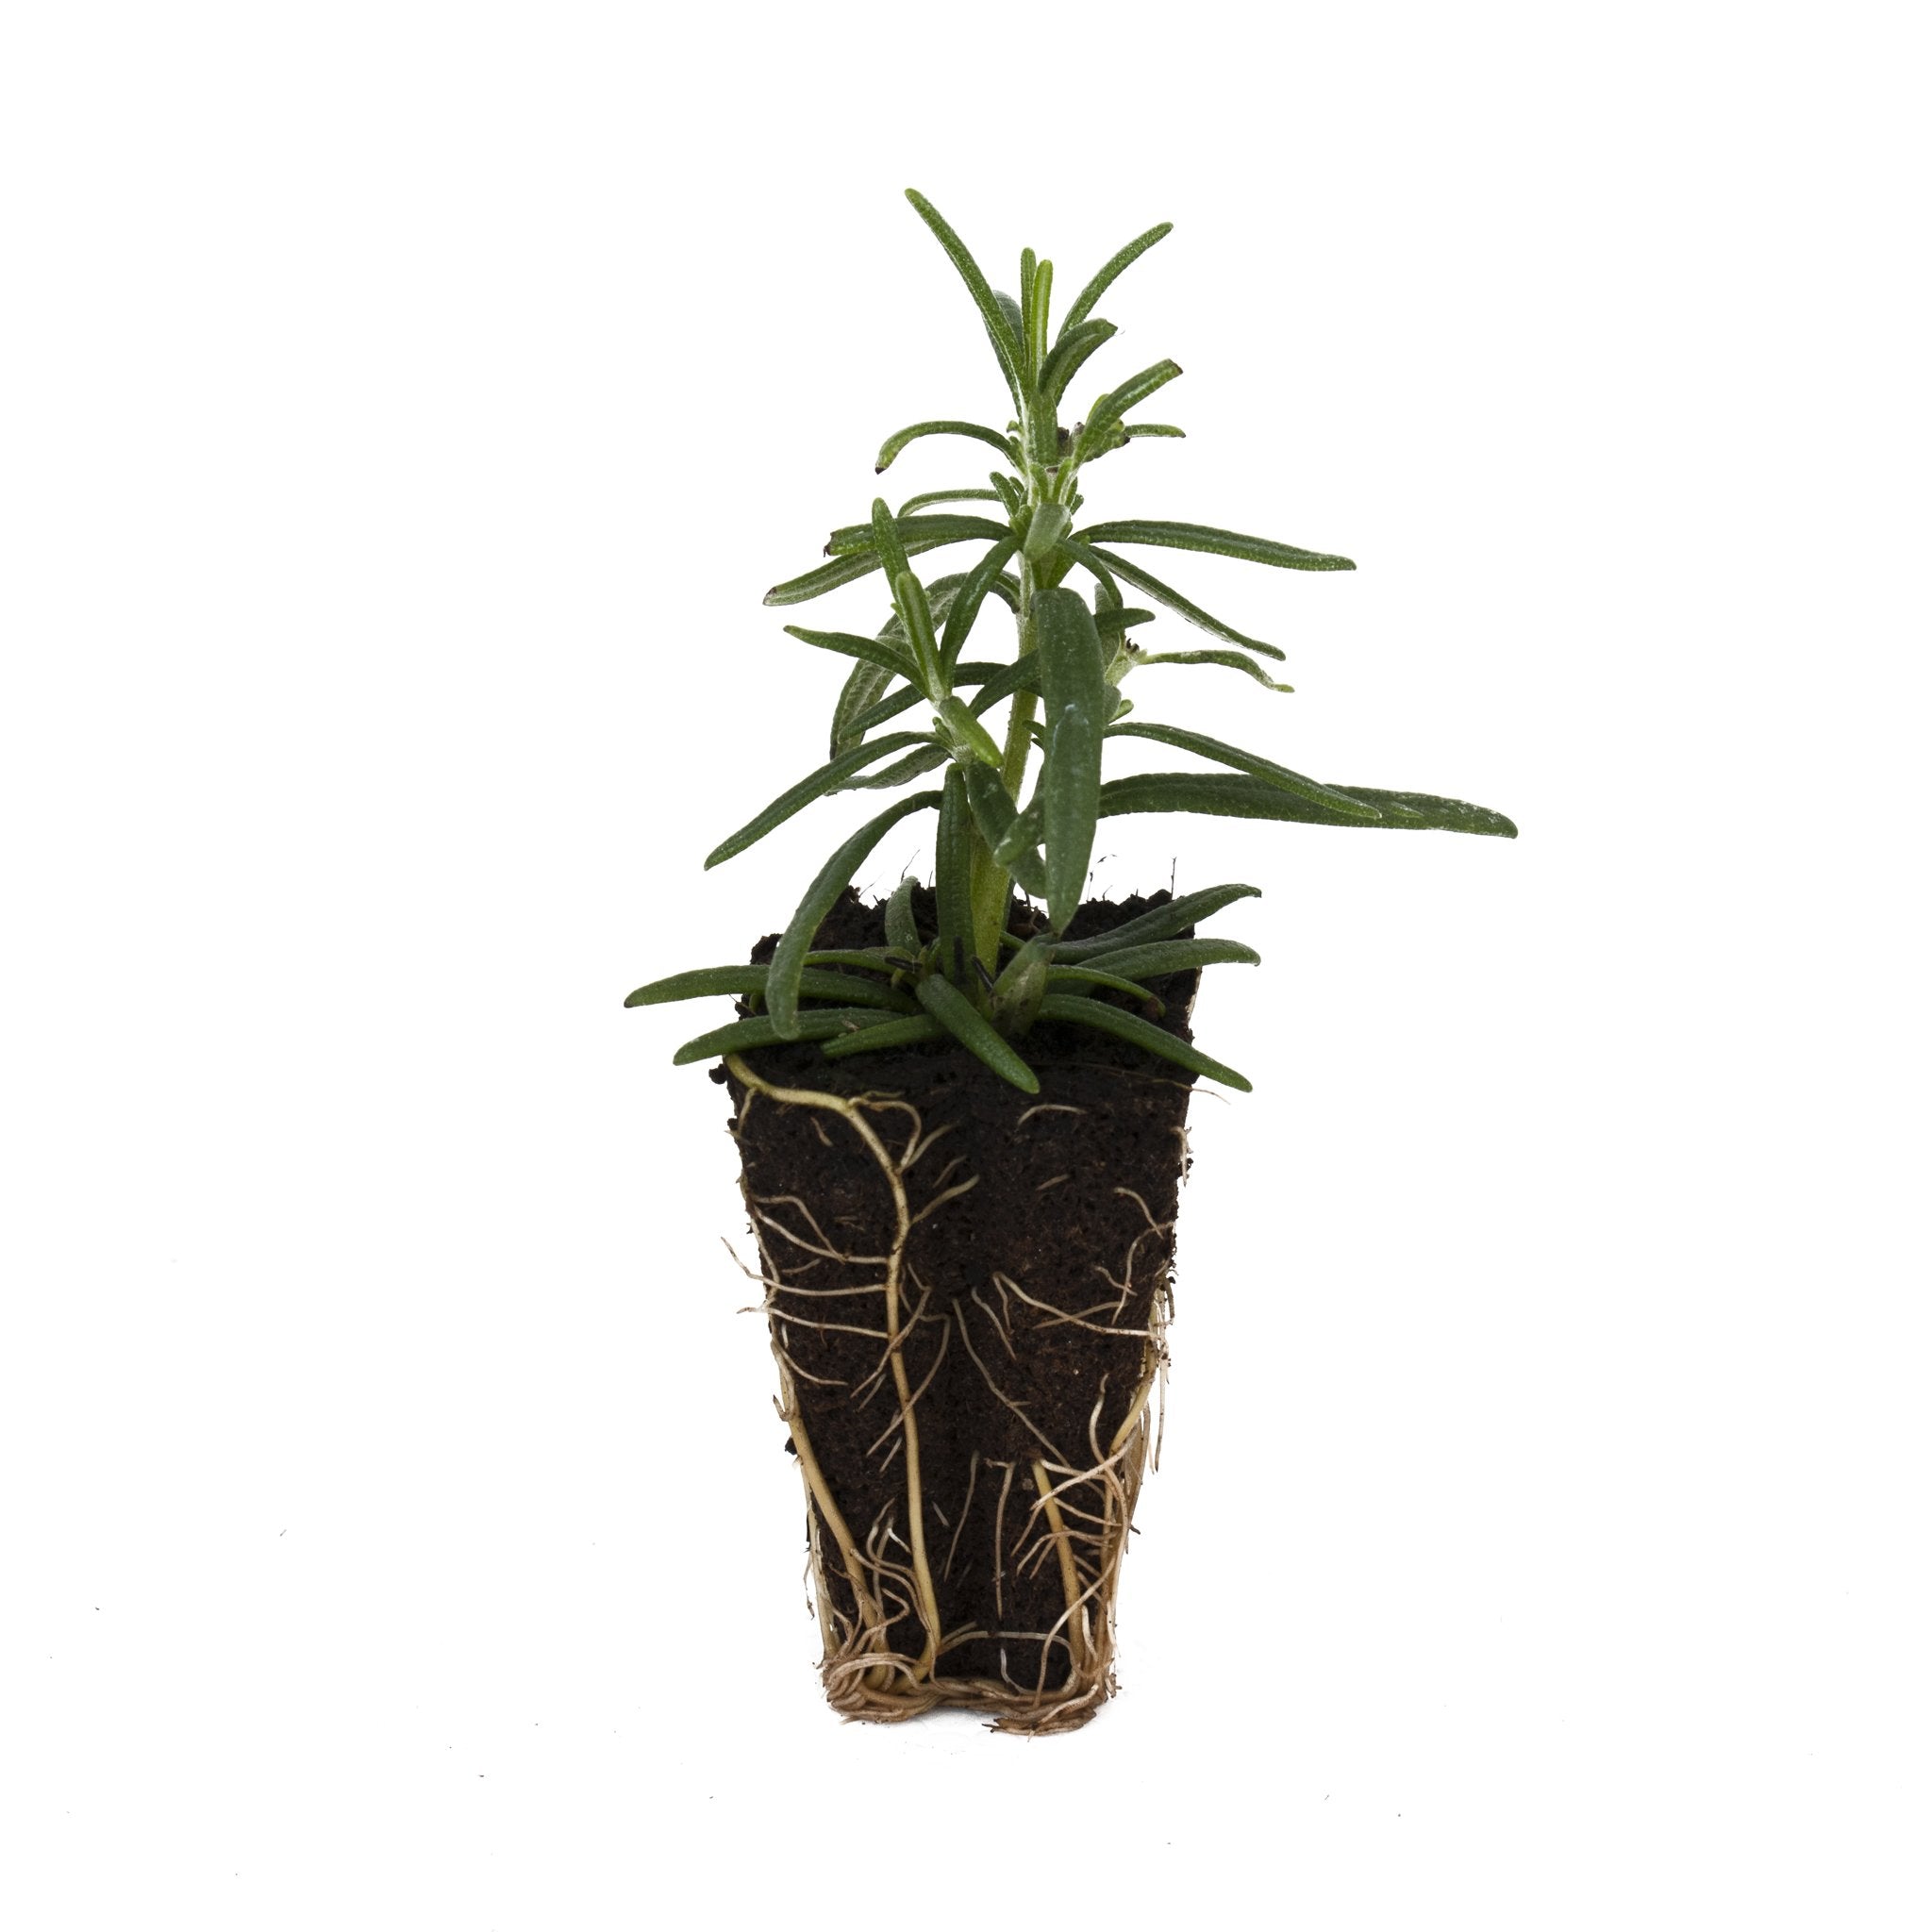 Prostrate Rosemary Herb Plant